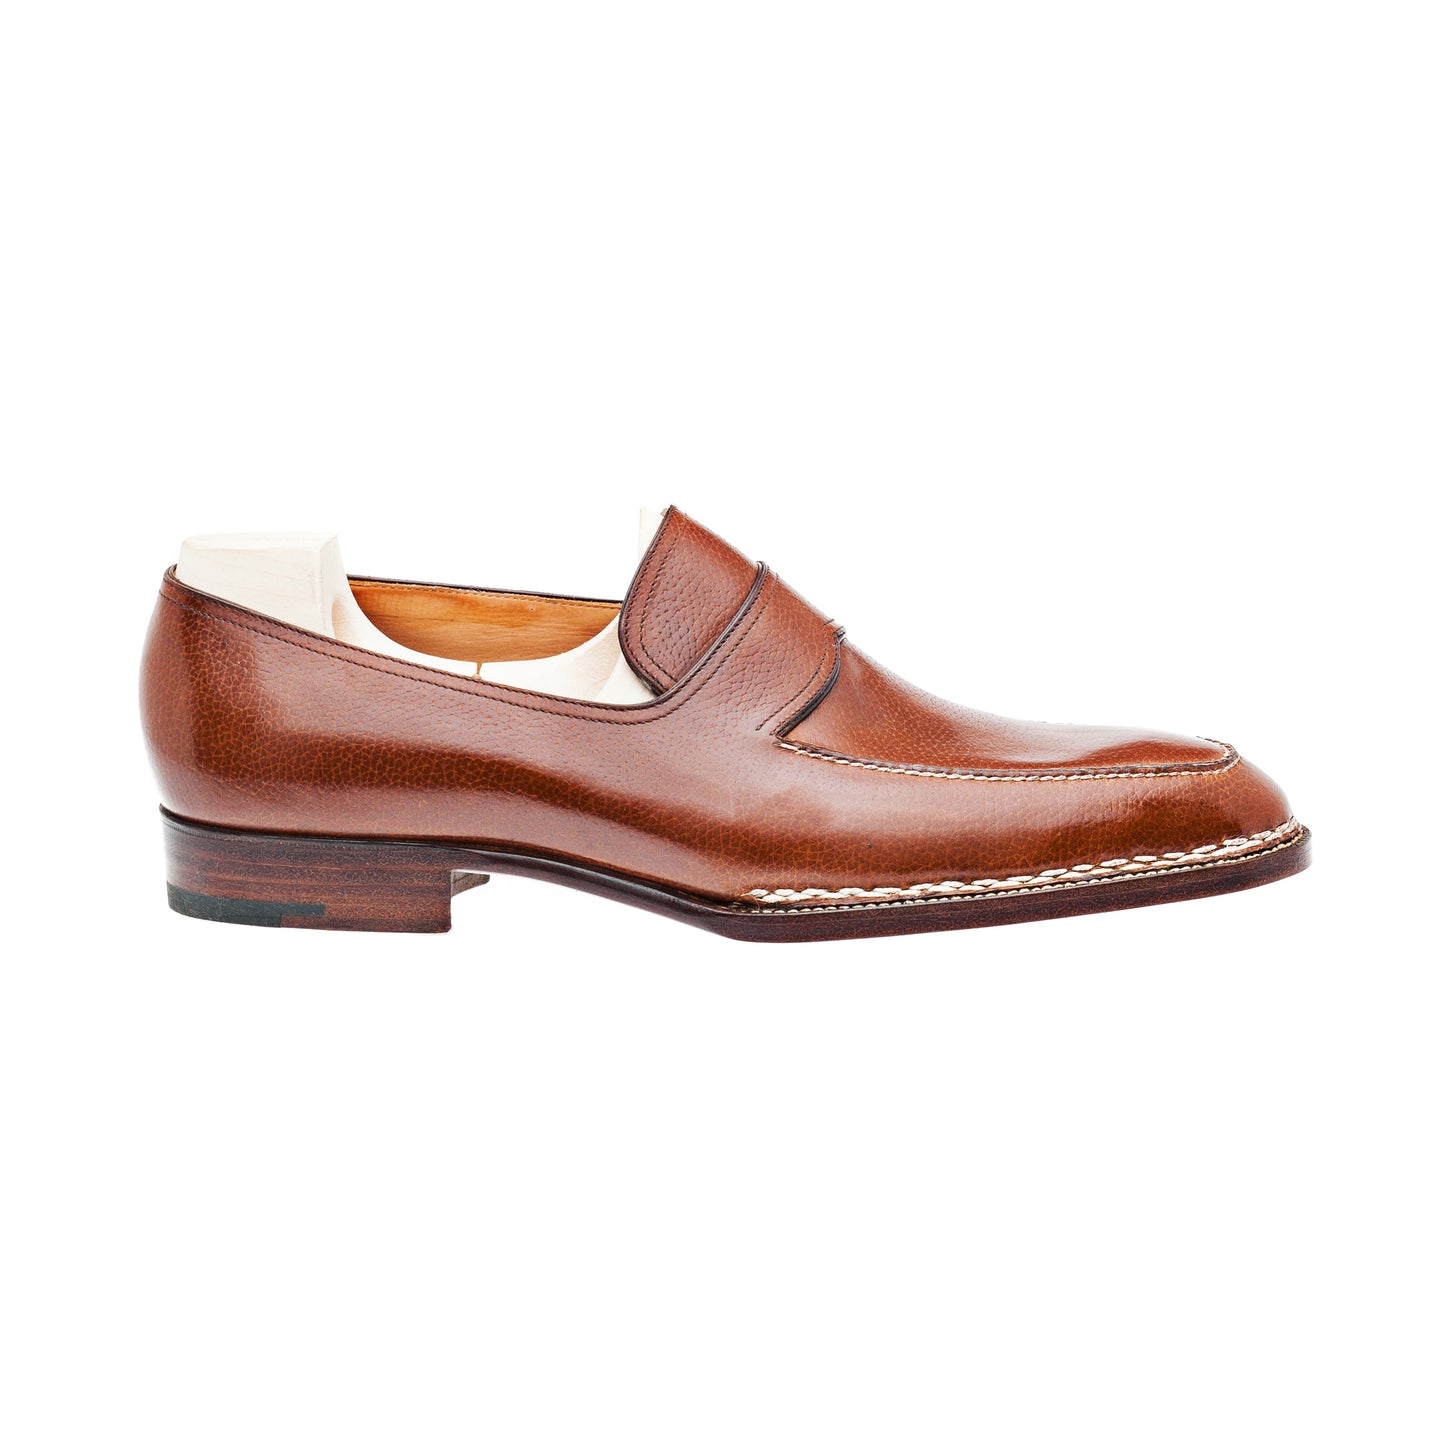 Norwegian Loafer with hand sewn apron in Cognac Inca calf leather